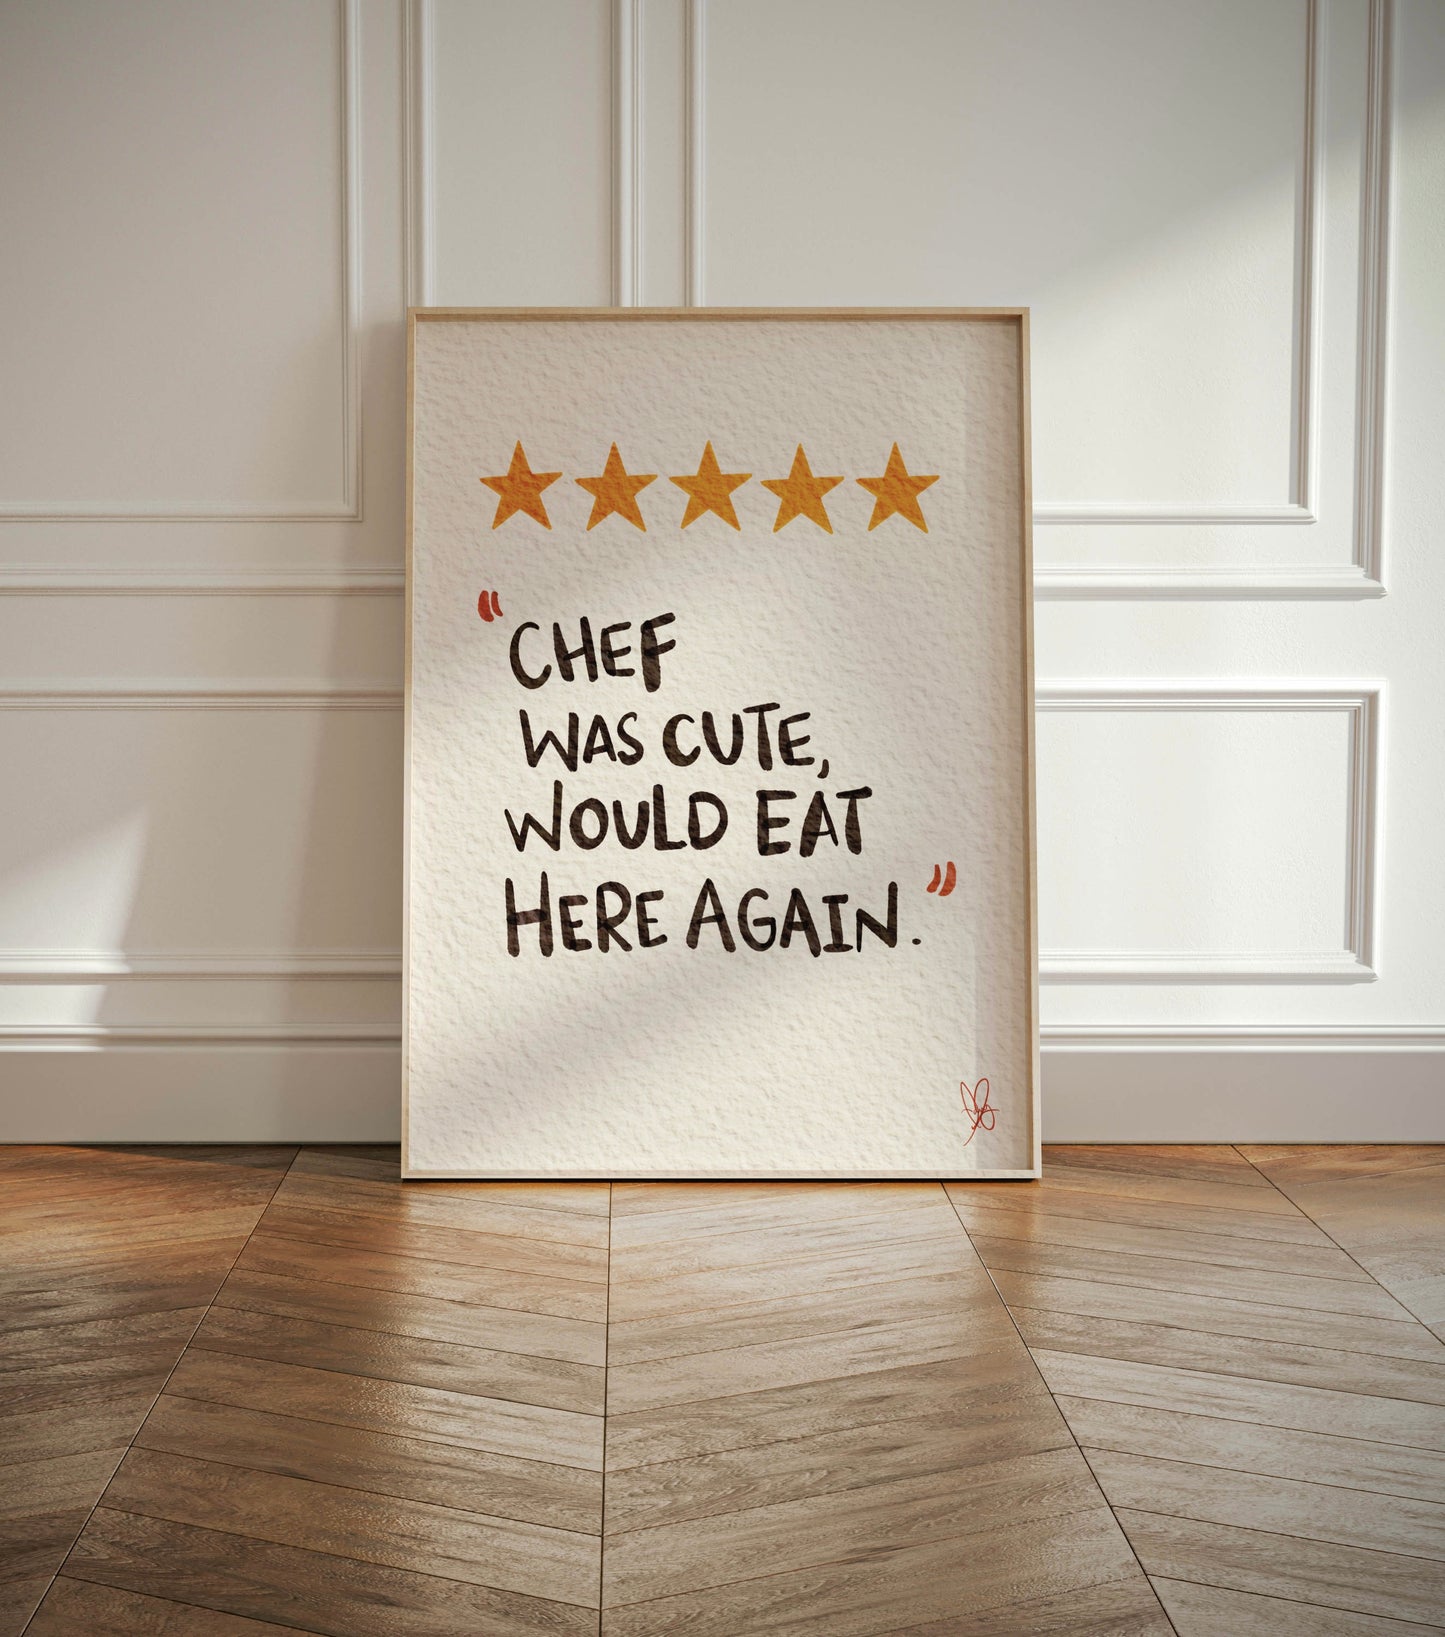 Cute Chef with Playful Quotes. "Chef Was Cute, Would Eat Here Again", Hand-Drawn Watercolor Poster for Foodies & Dining Spaces.